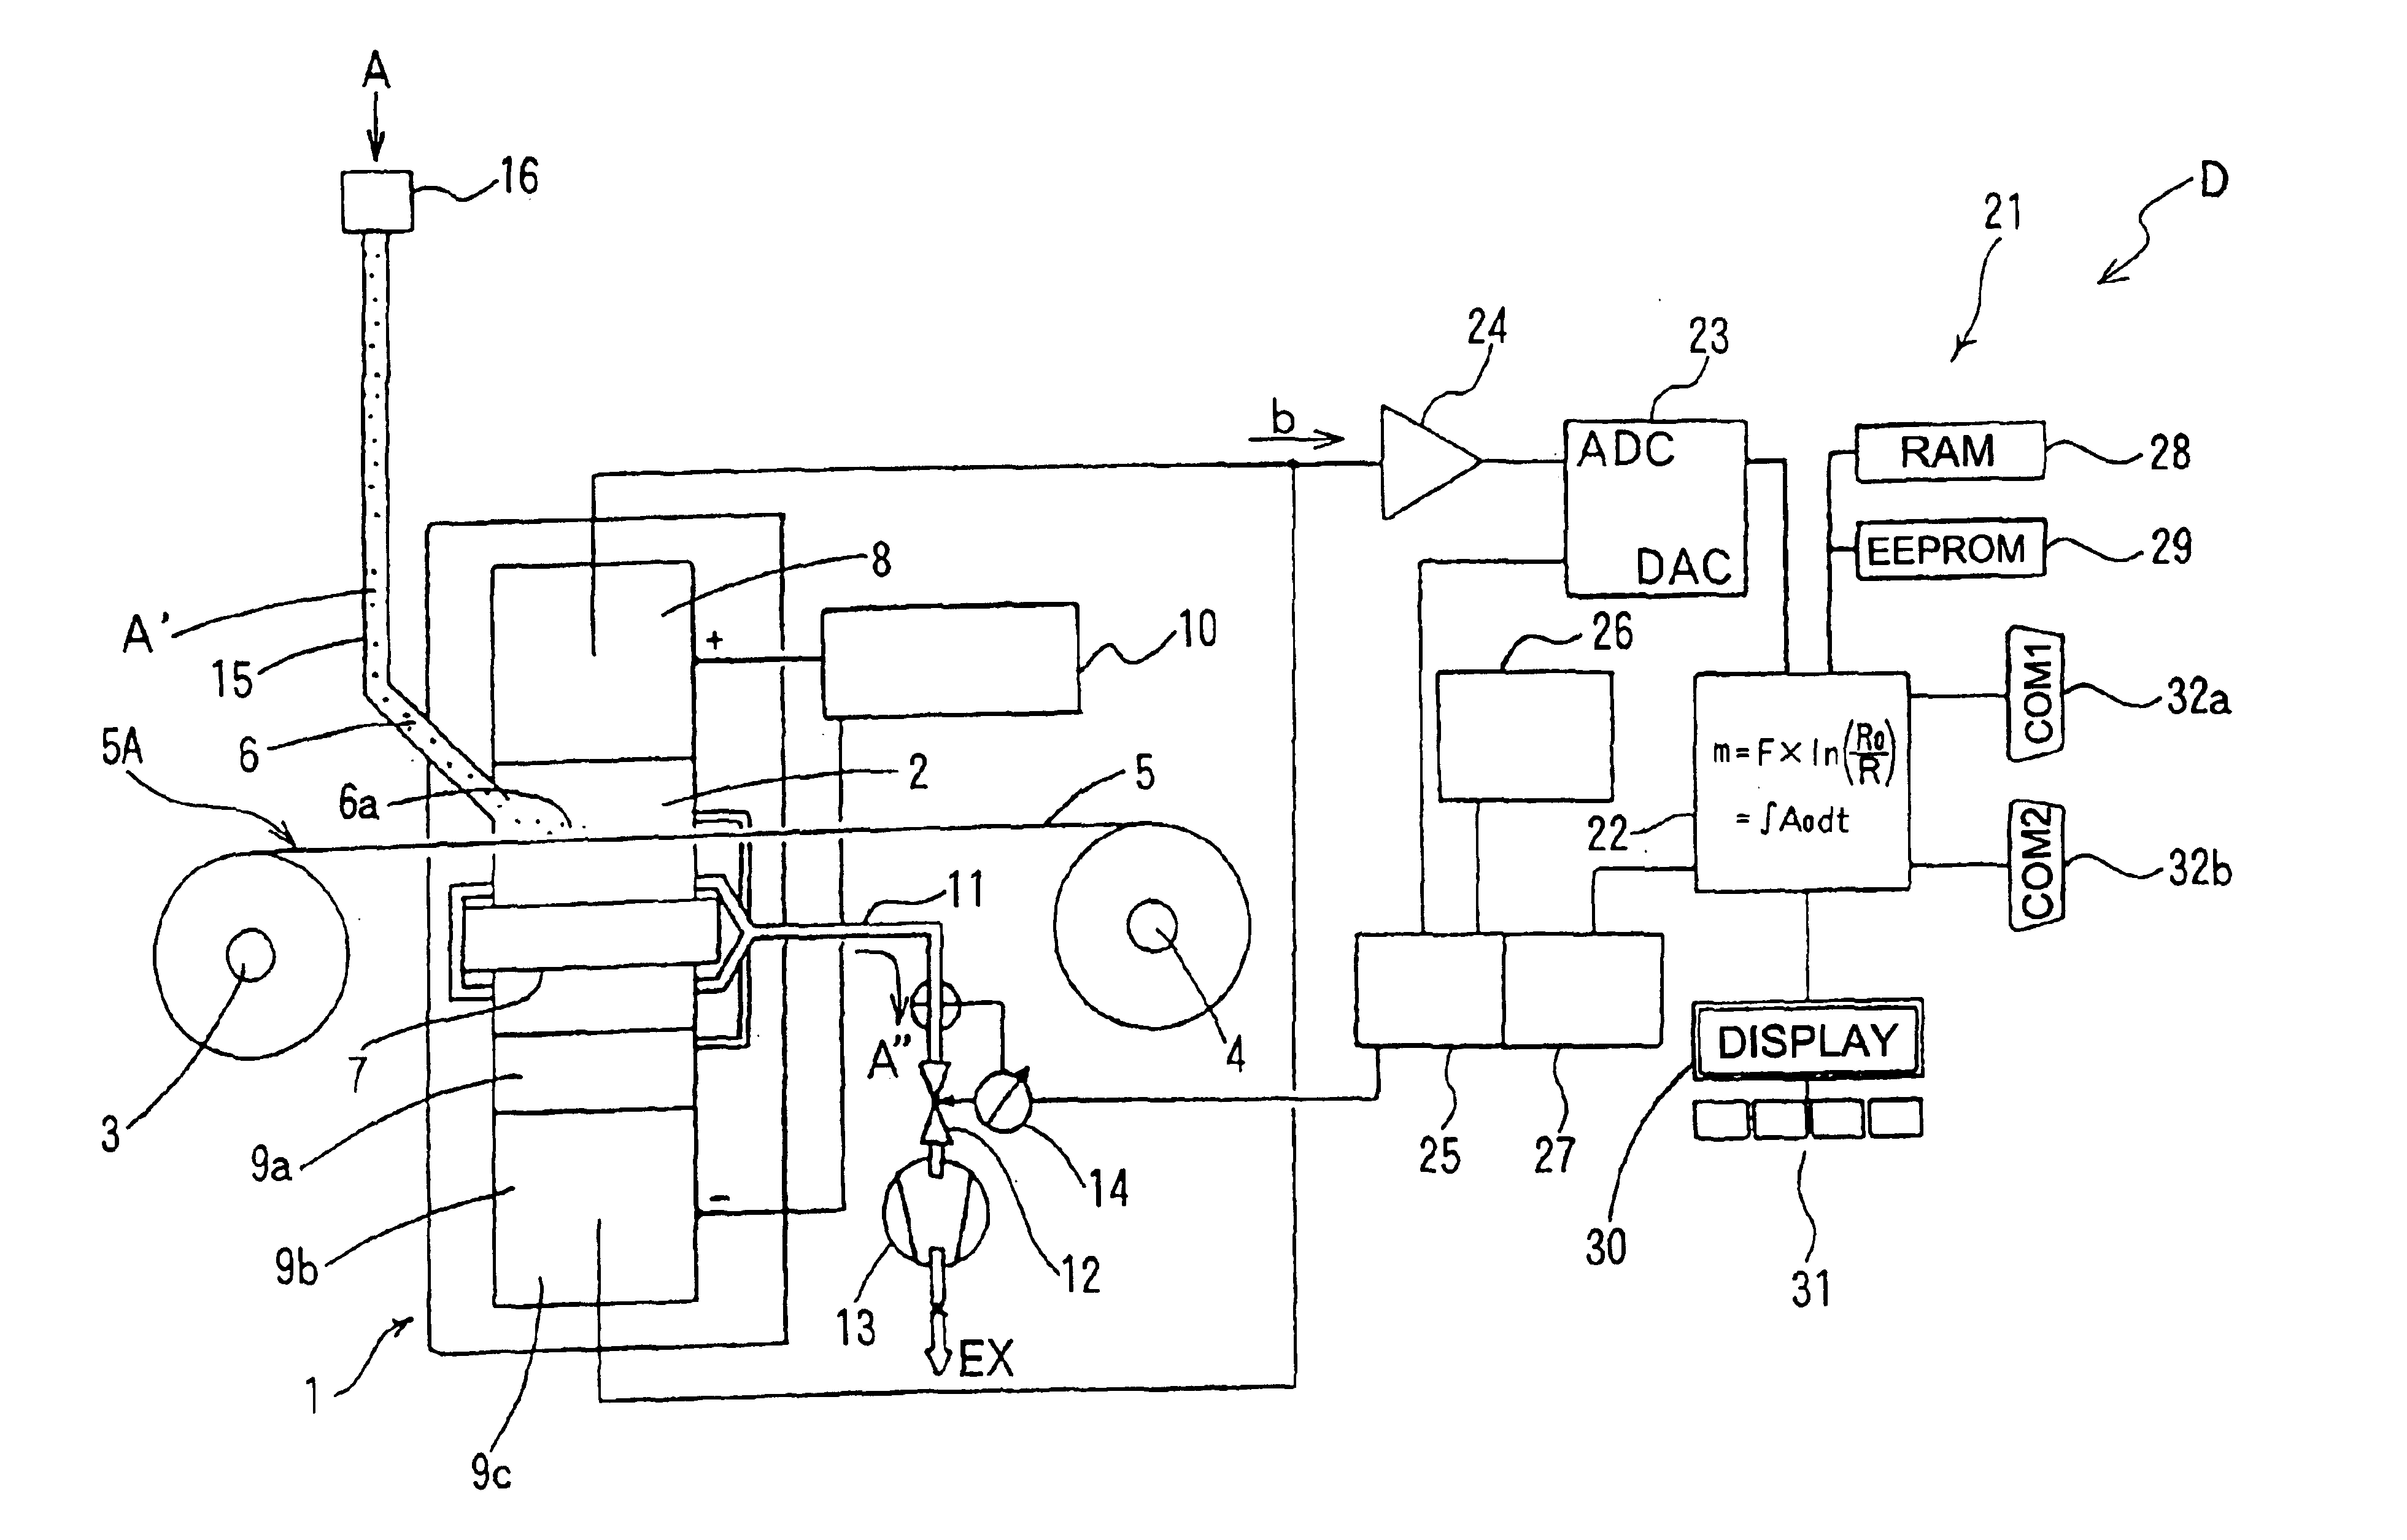 Particulate matter concentration measuring apparatus